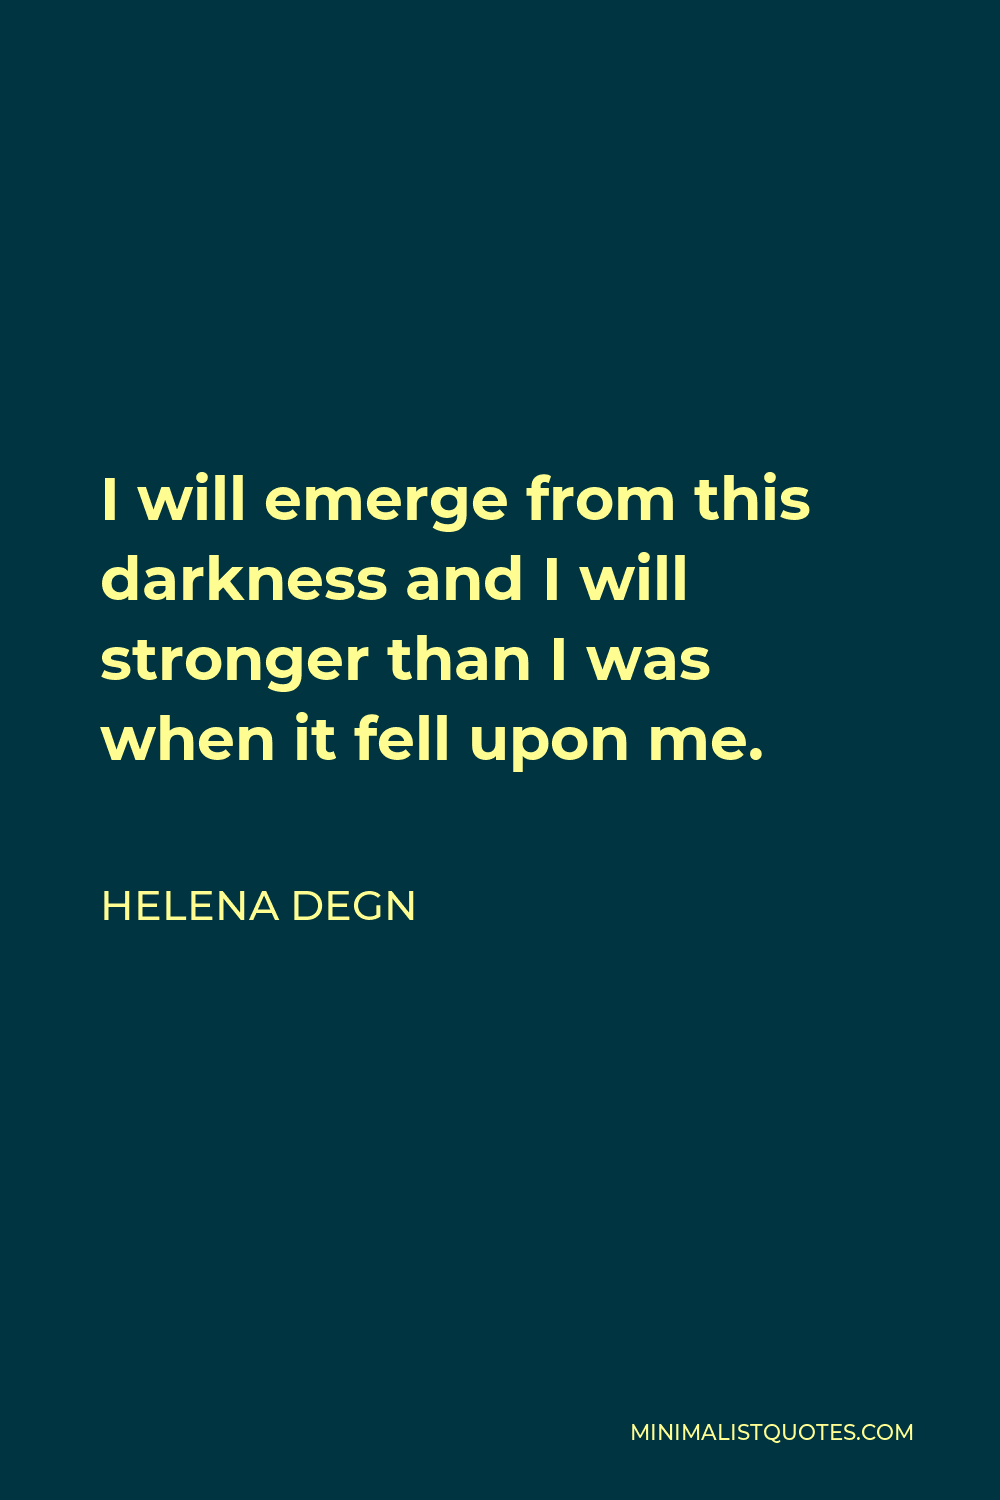 Helena Degn Quote - I will emerge from this darkness and I will stronger than I was when it fell upon me.